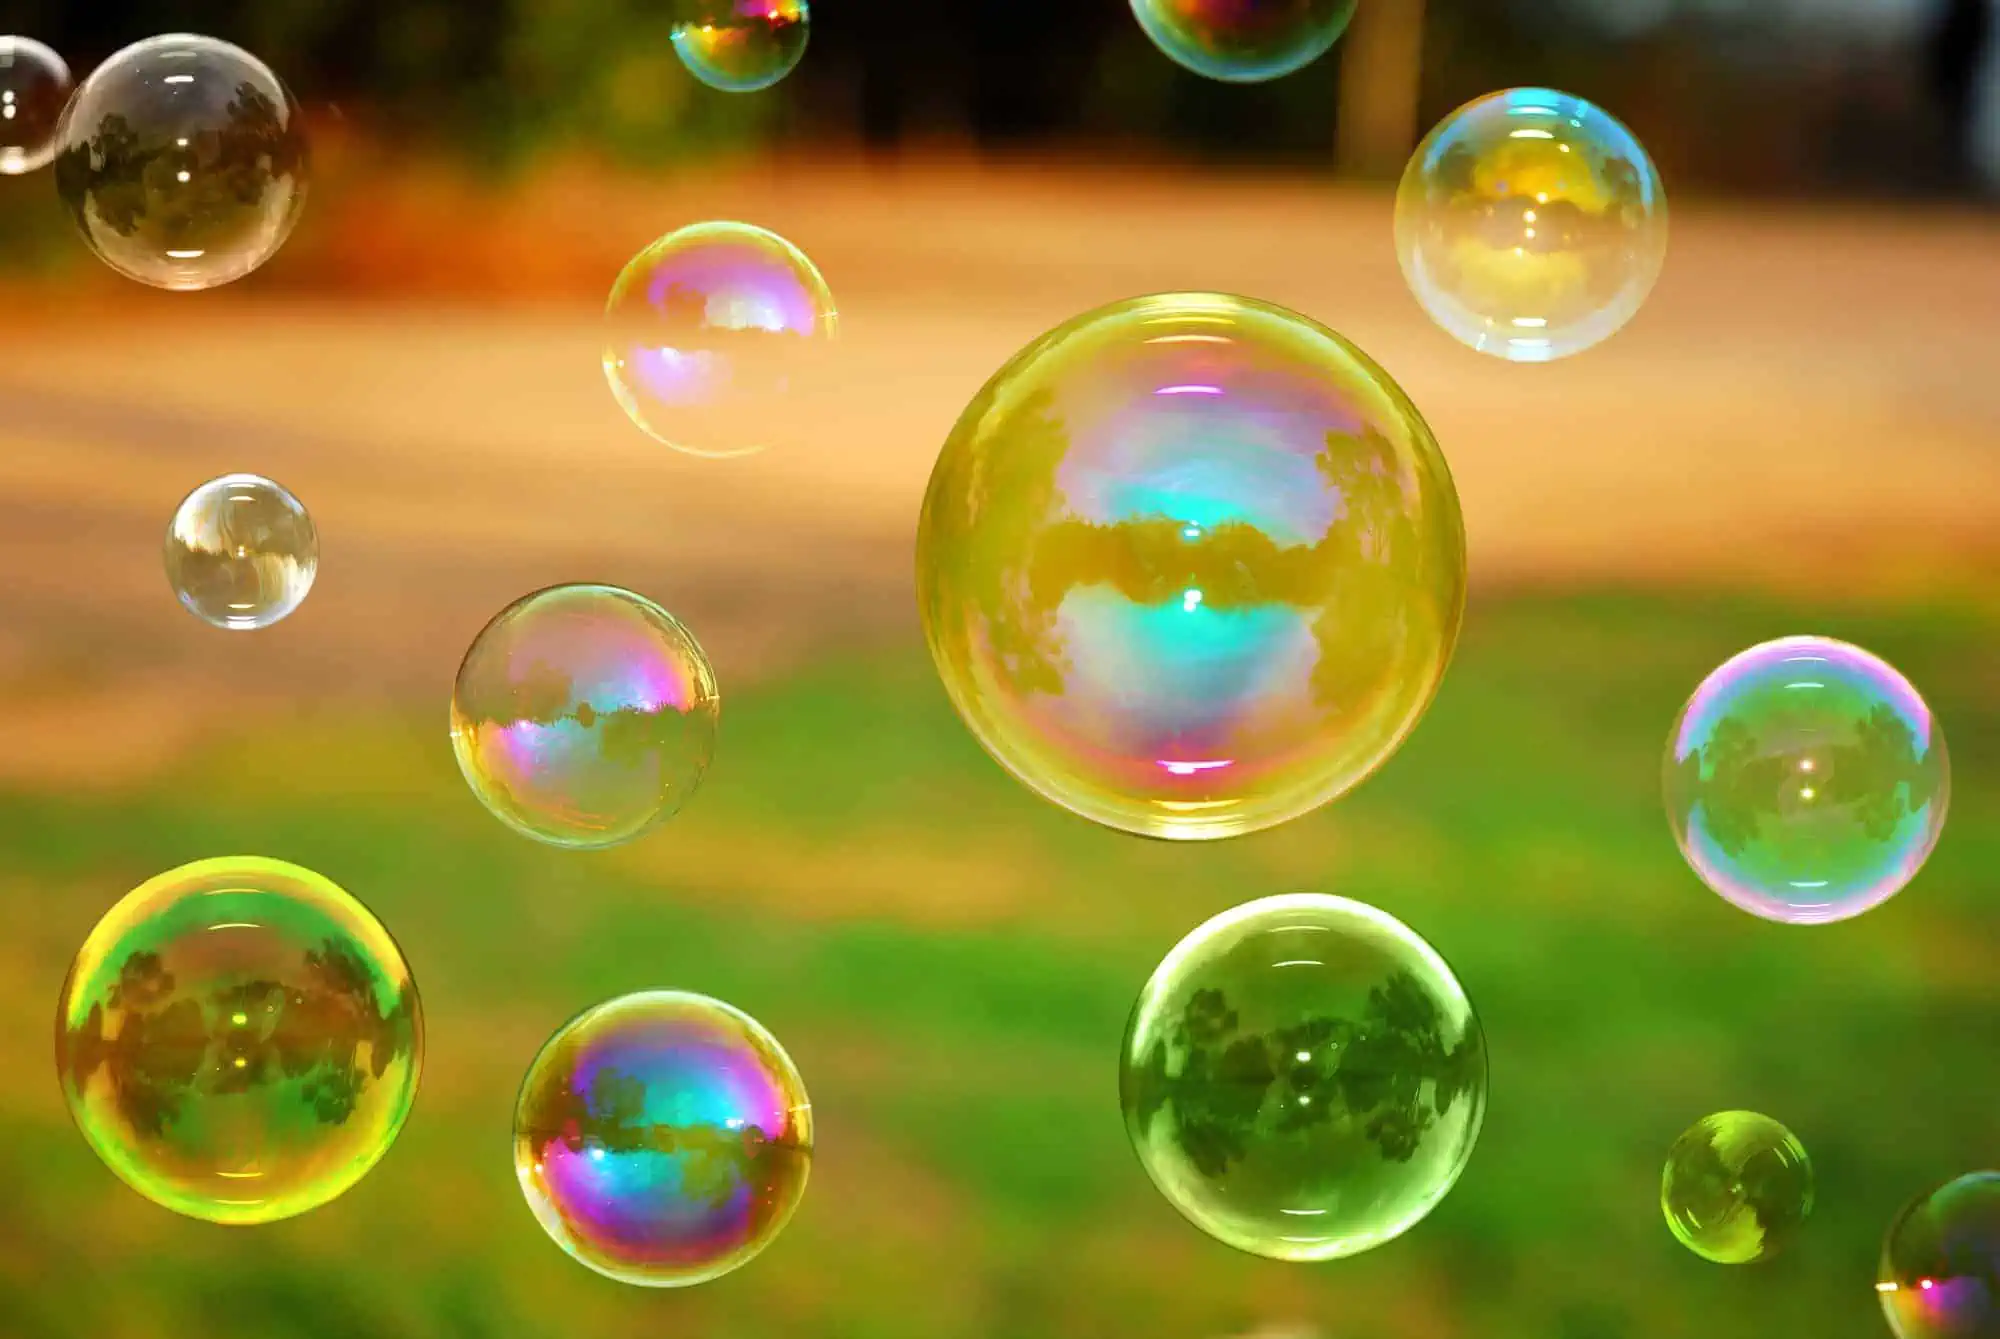 Investing in collectibles: bubbles floating in the air.